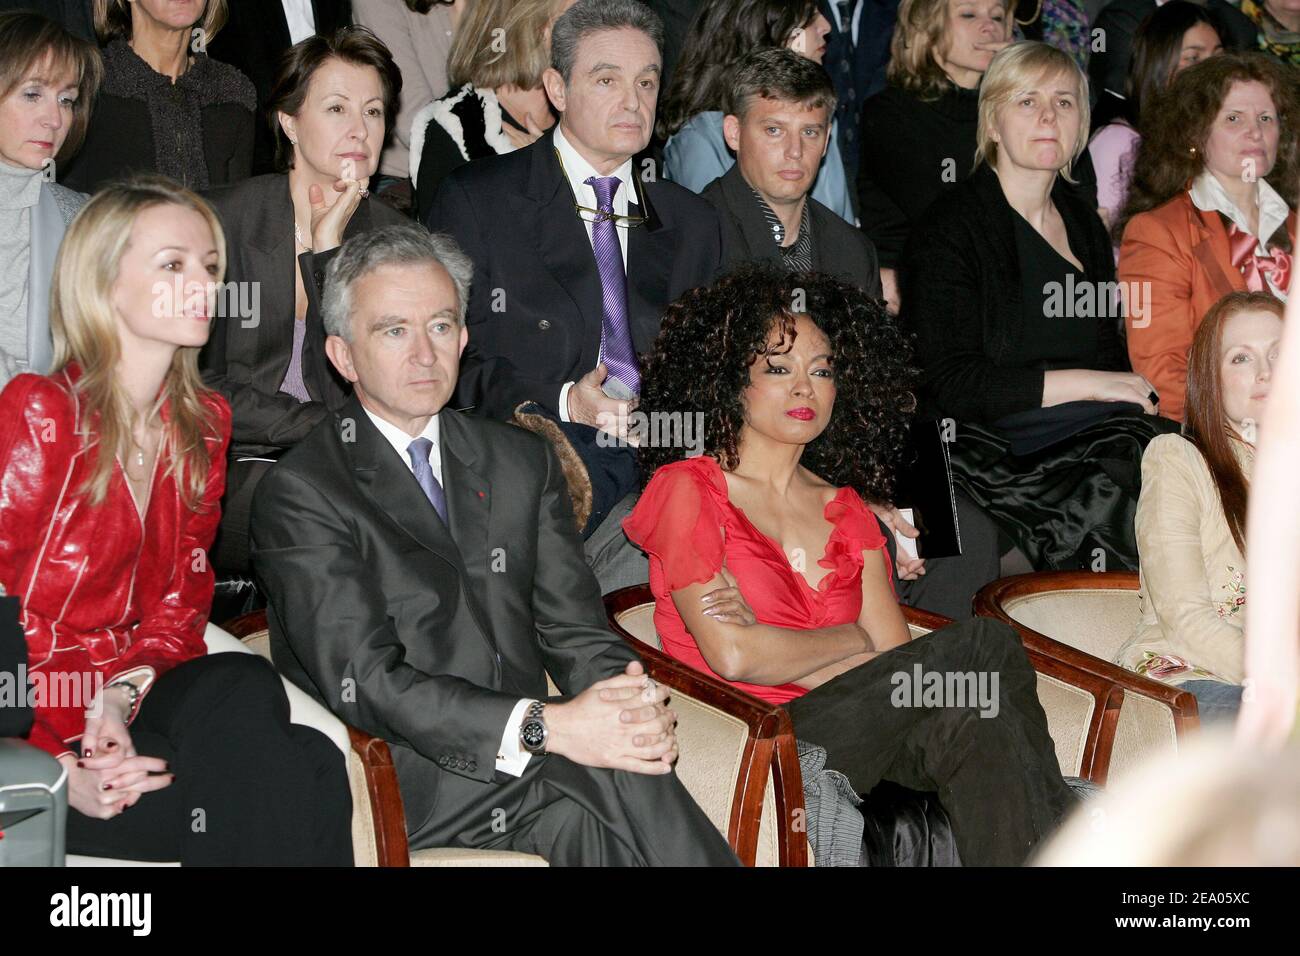 Bernard Arnault, his daughter Delphine, American singer Diana Ross,  American actress Julianne Moore pictured before British fashion designer  John Galliano's Ready-to-Wear Fall-Winter 2005-2006 collection presentation  for French fashion house Christian